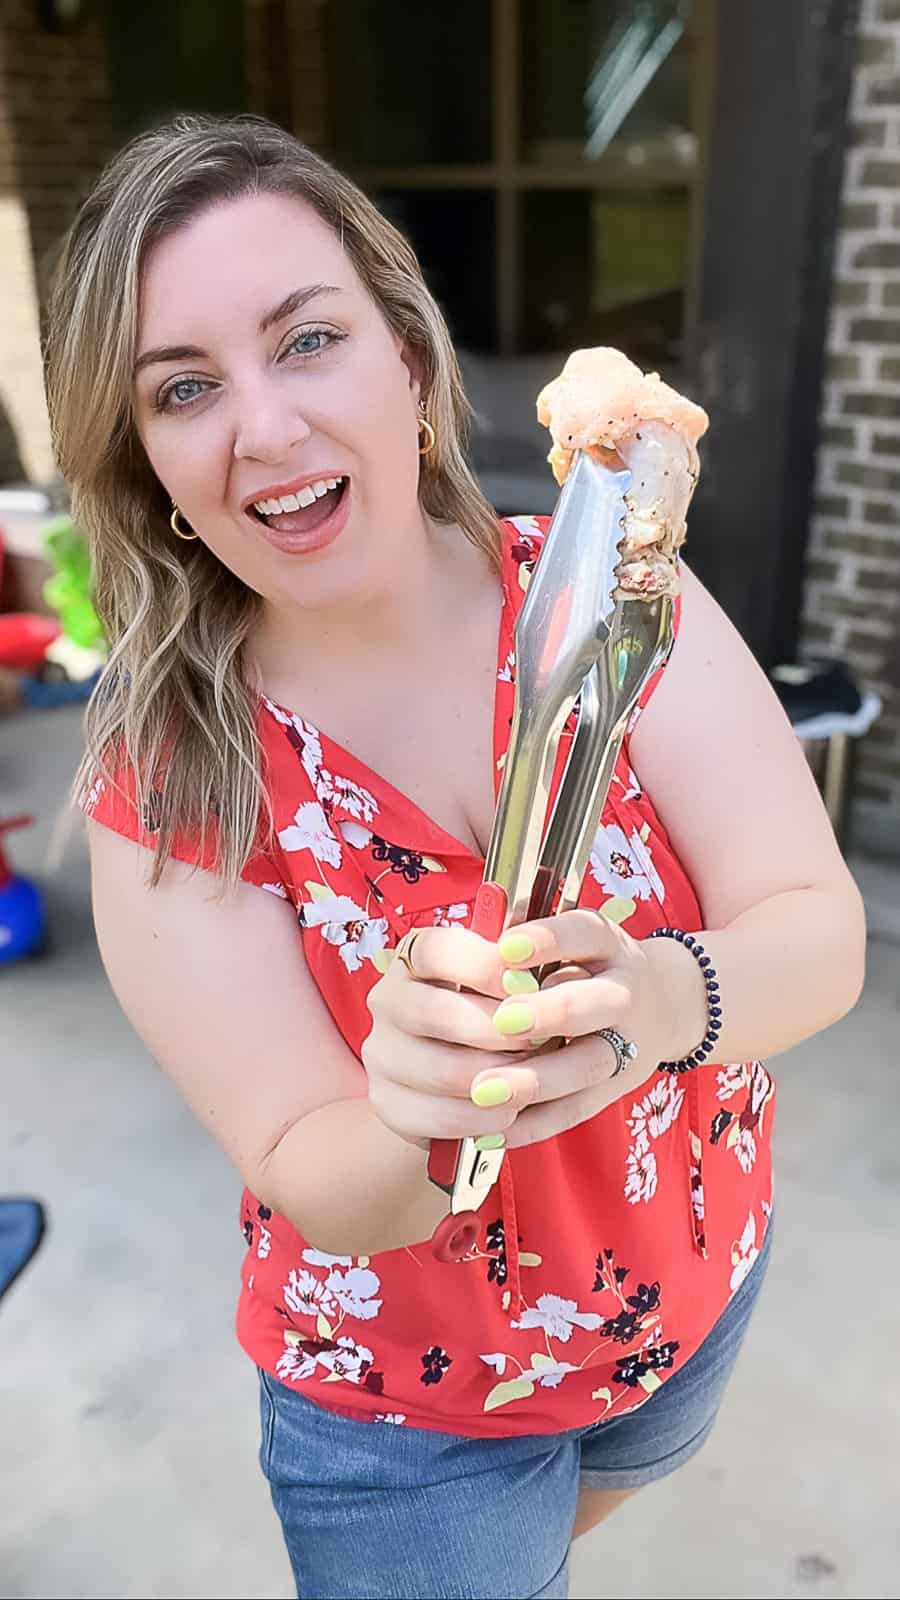 Jenna Passaro Food Blogger of Sip Bite Go in Taco Night Party Outfit Holding Smoked Chicken Wing